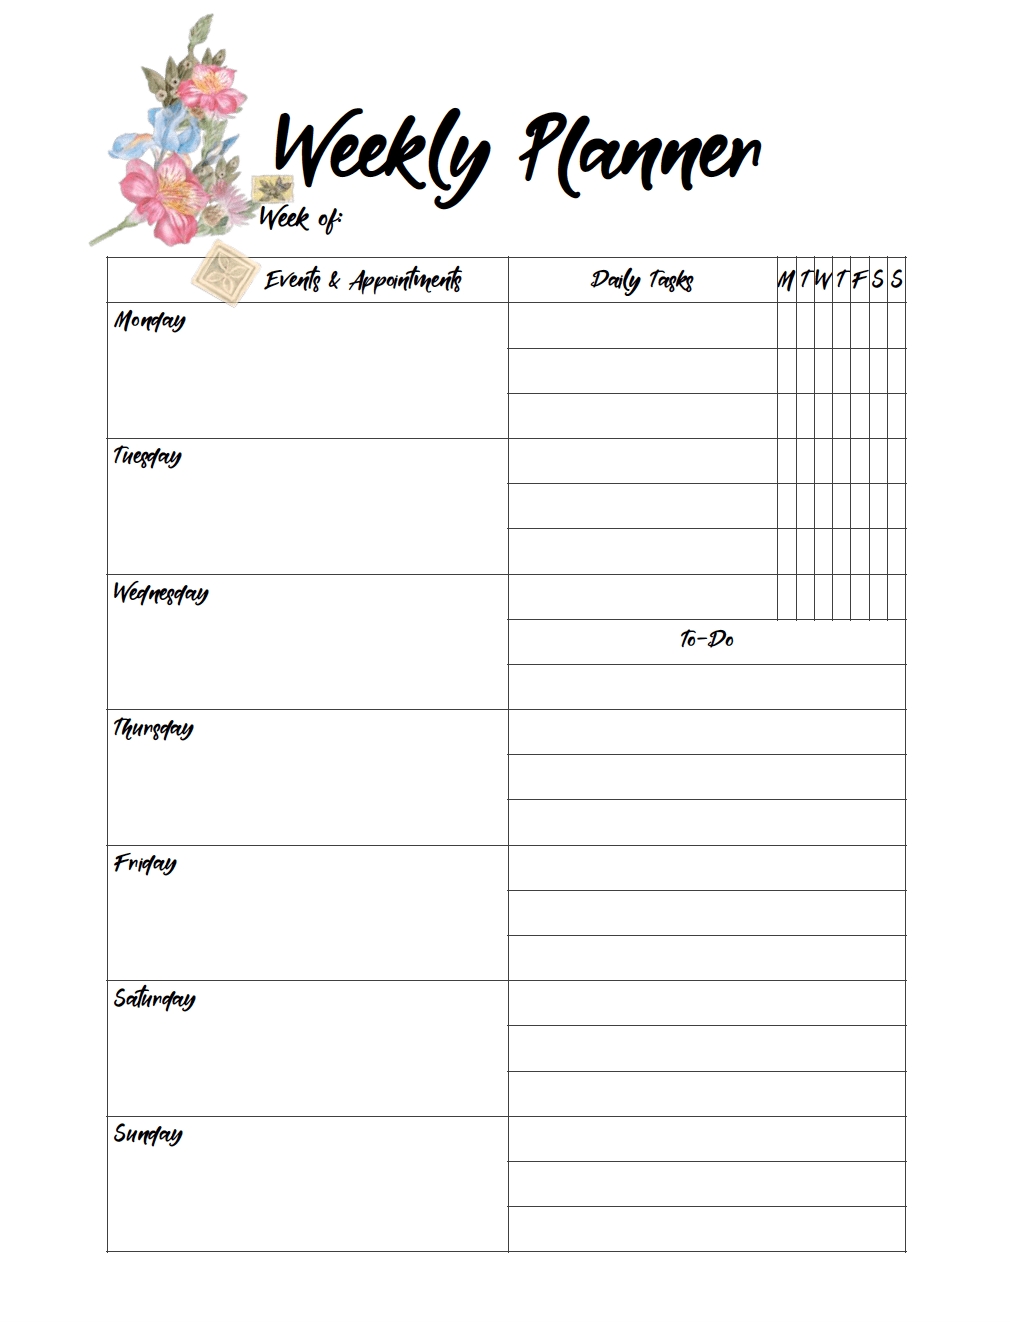 Free Printable Weekly Planners: Monday Start for Weekly Calendar Monday Through Friday